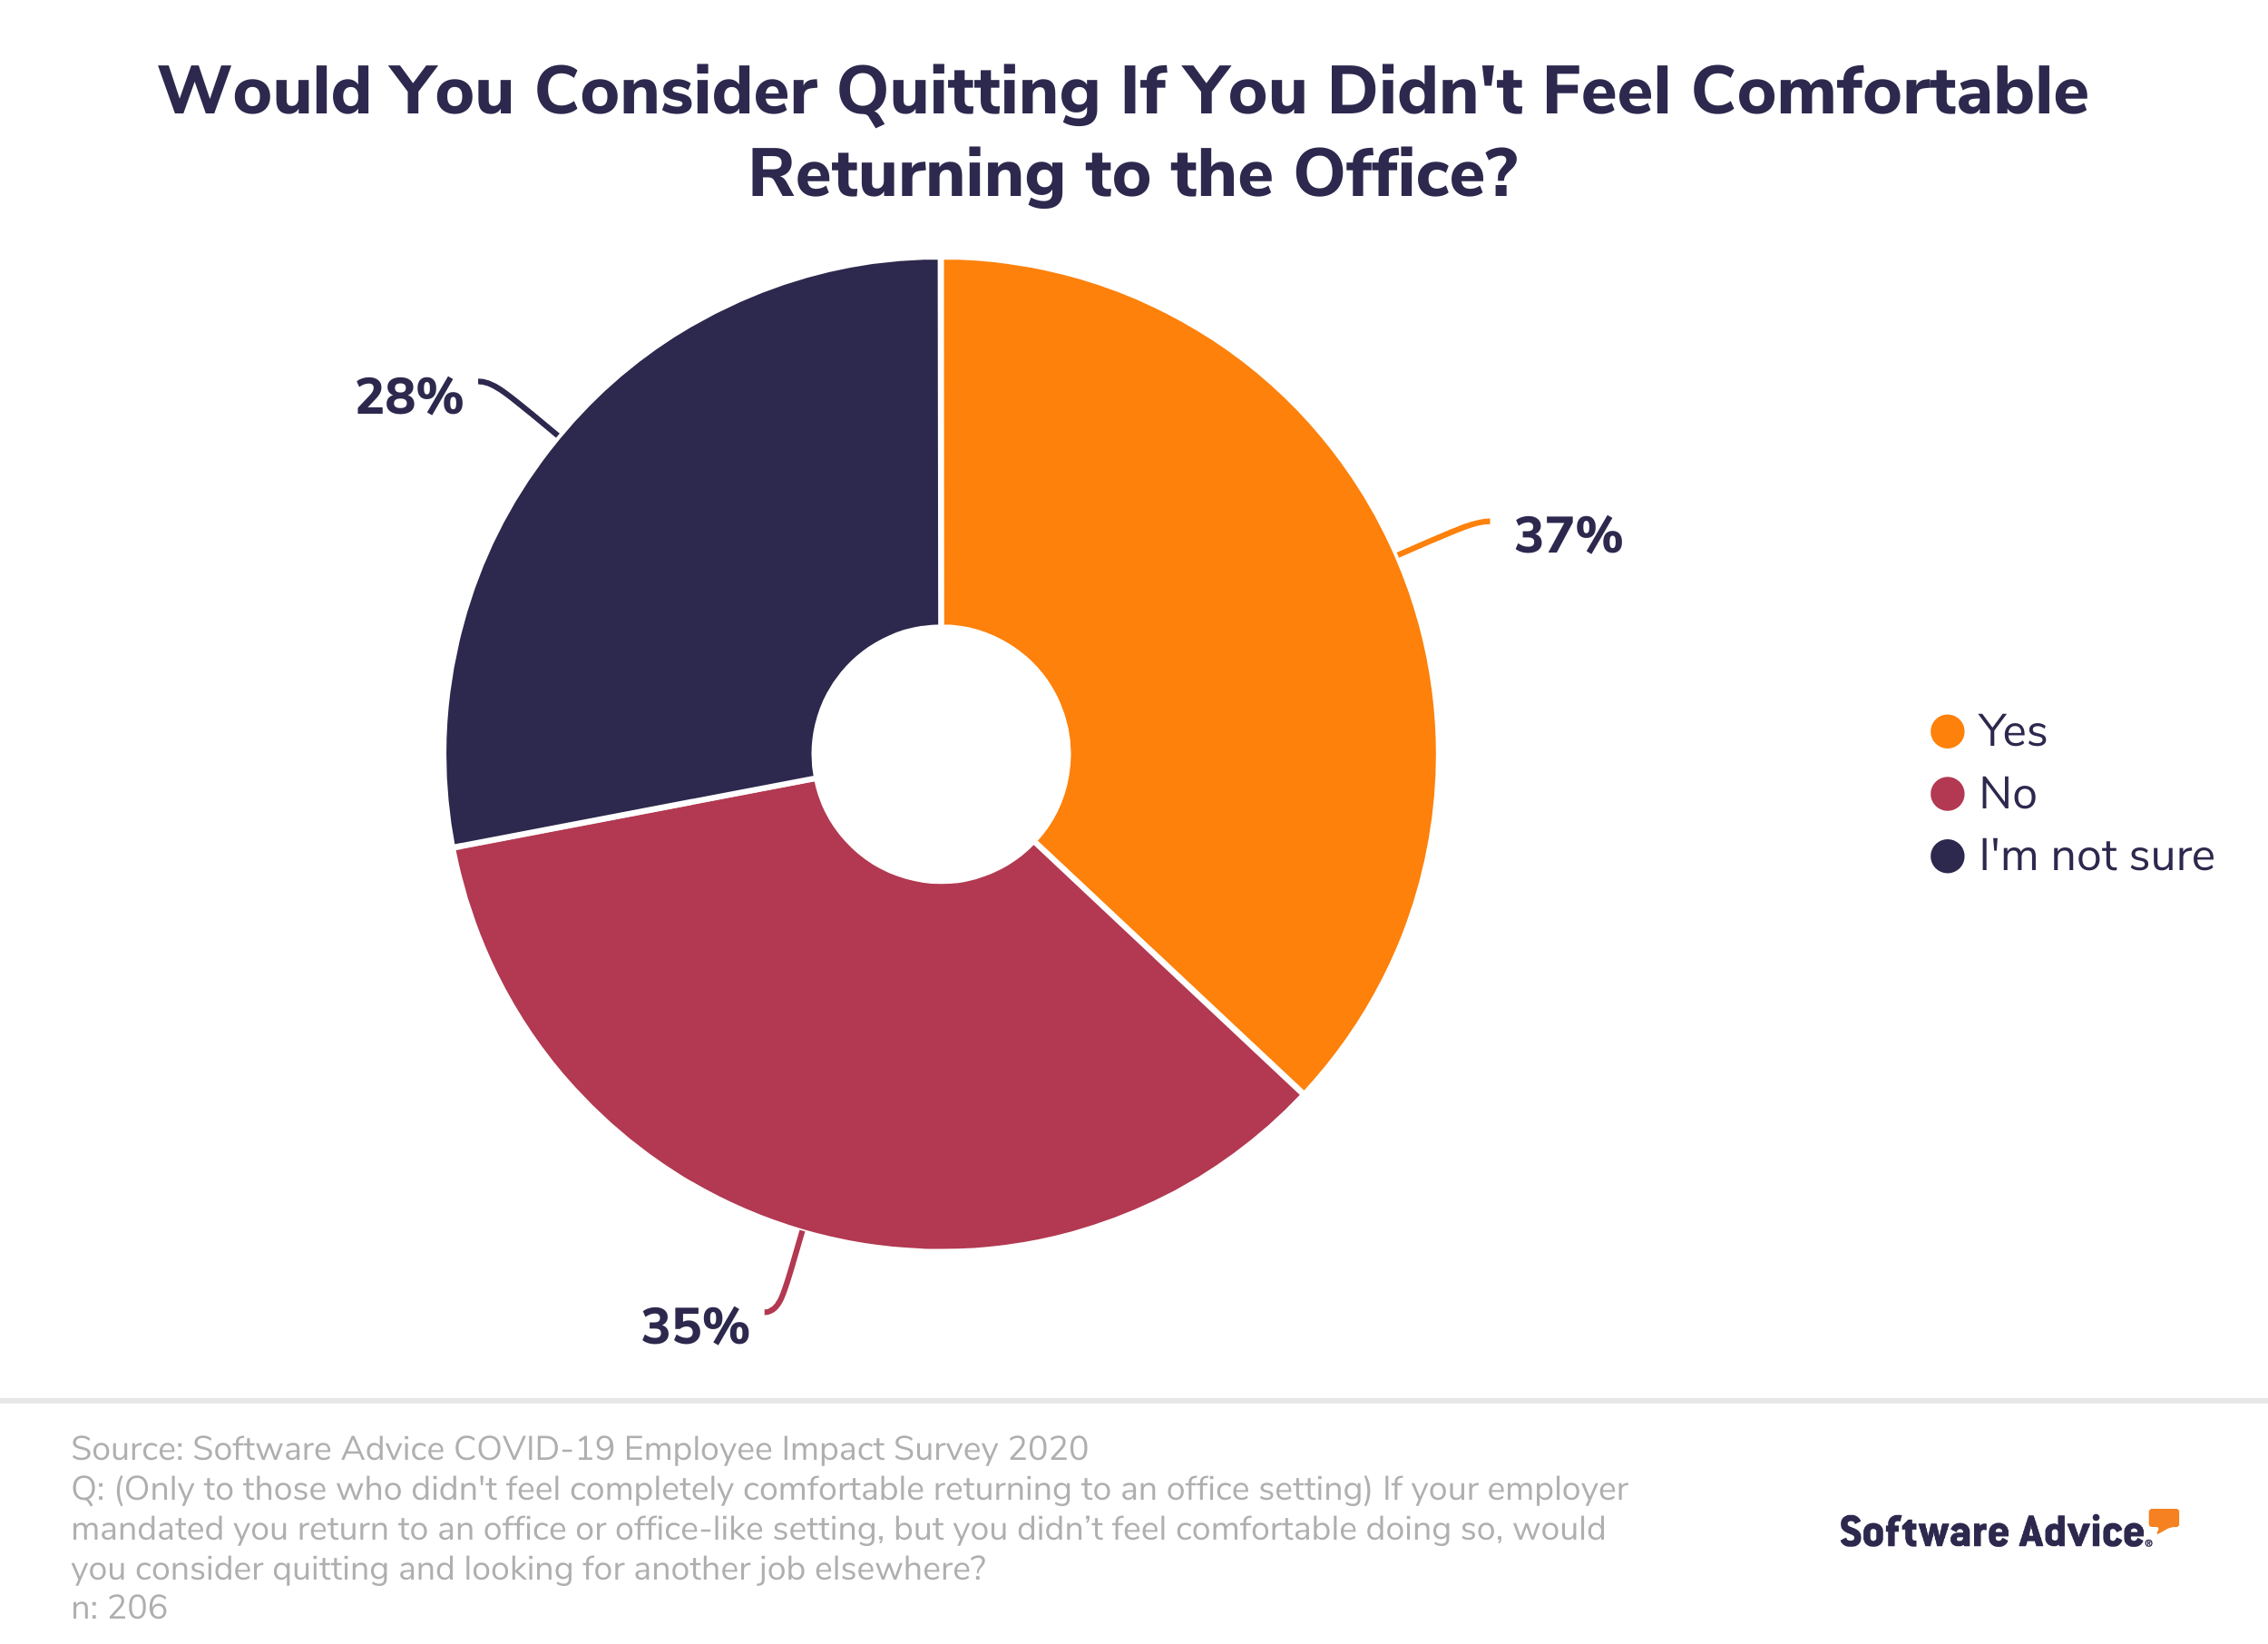 Pie-chart-showing-37%-of-employees-would-consider-quitting-their-job-if-their-employer-forced-them-back-into-an-office-setting-and-they-didn't-feel-comfortable-going.